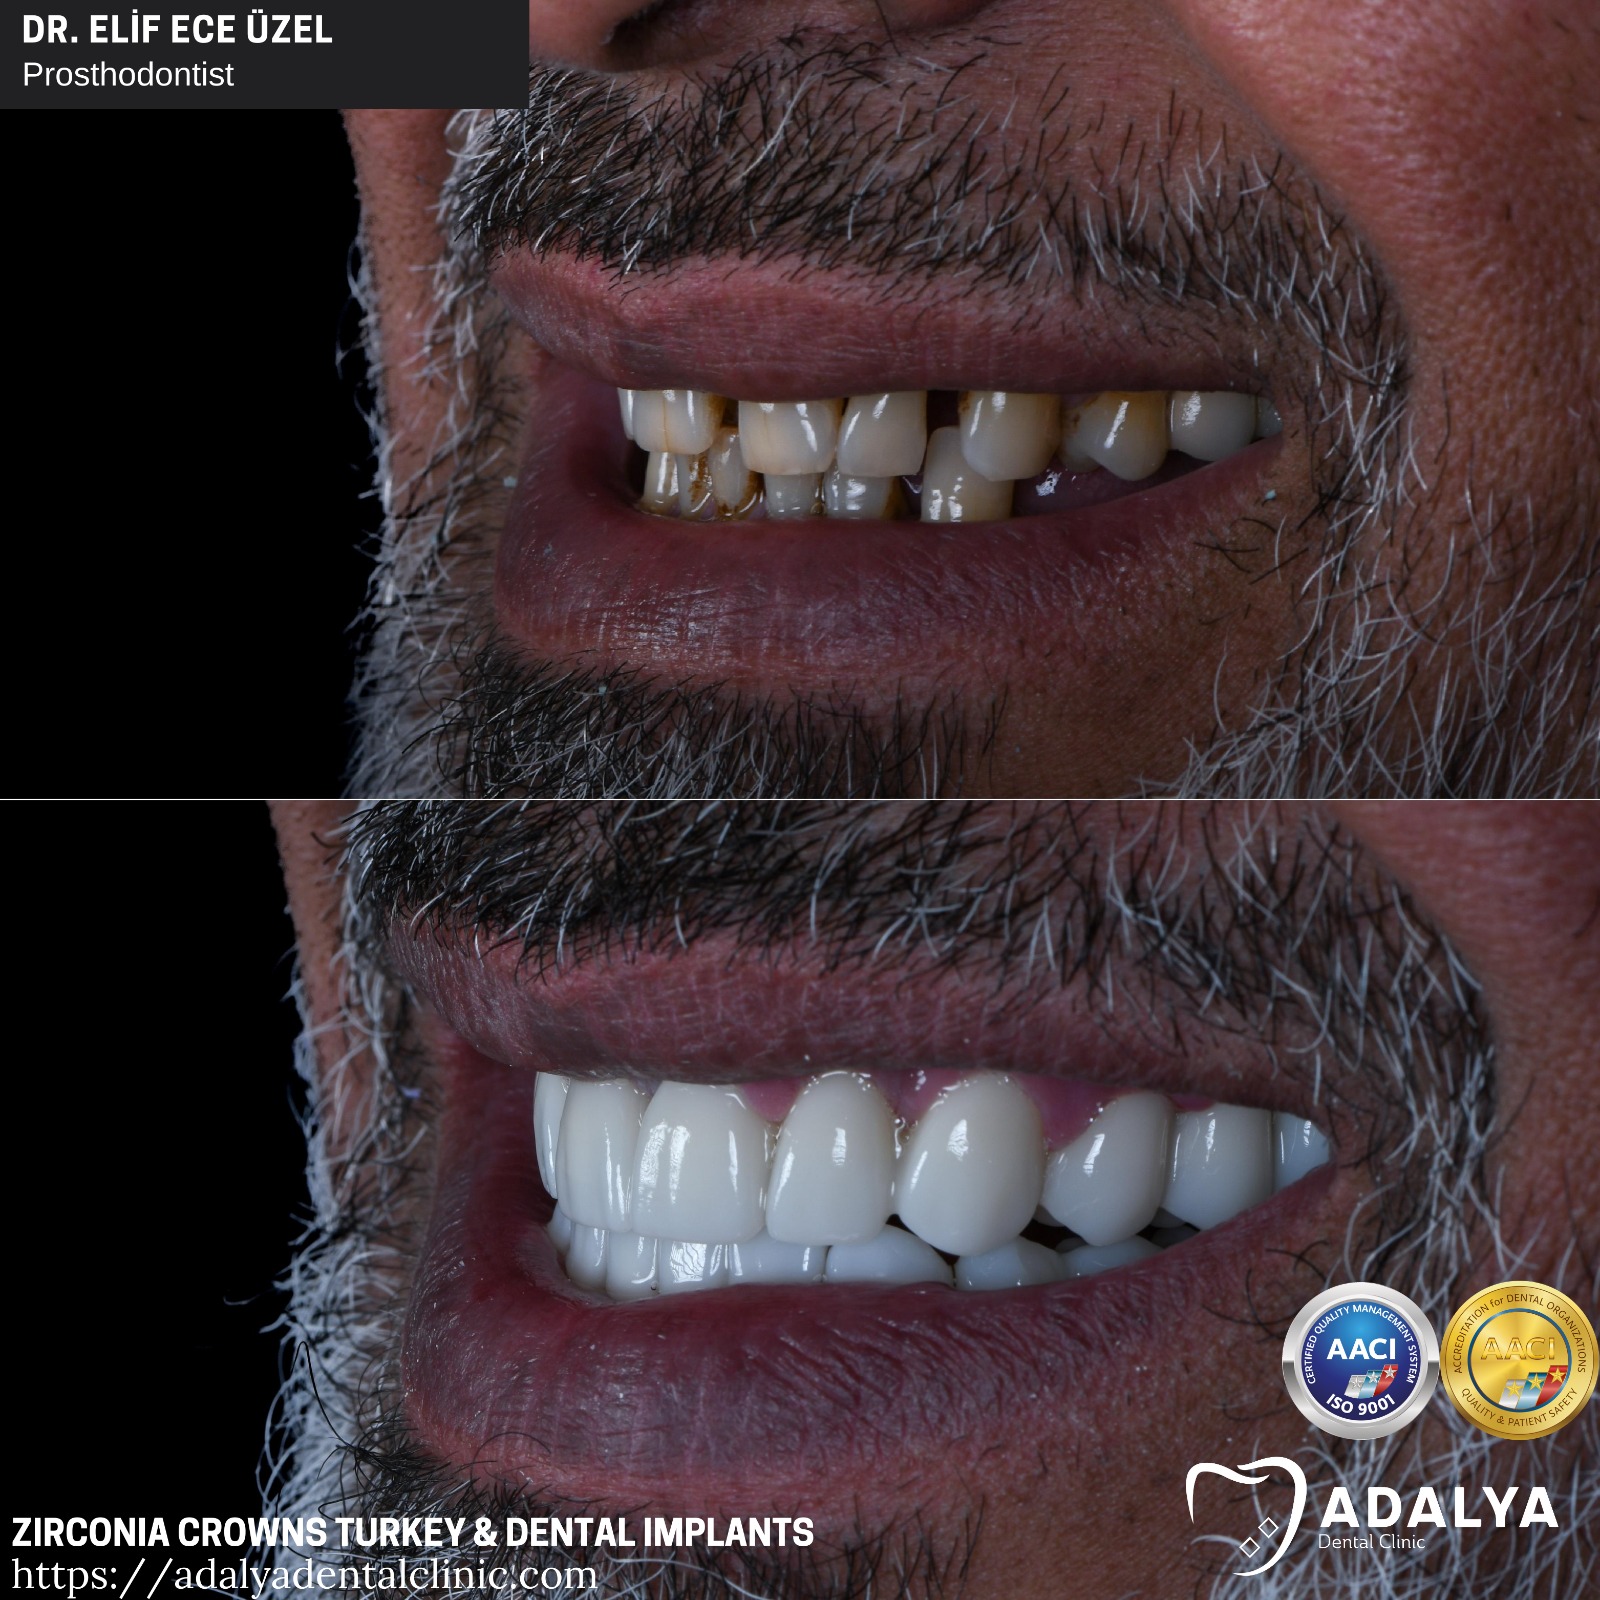 dental clinic antalya turkey zirconia crowns tooth implants cost packages price